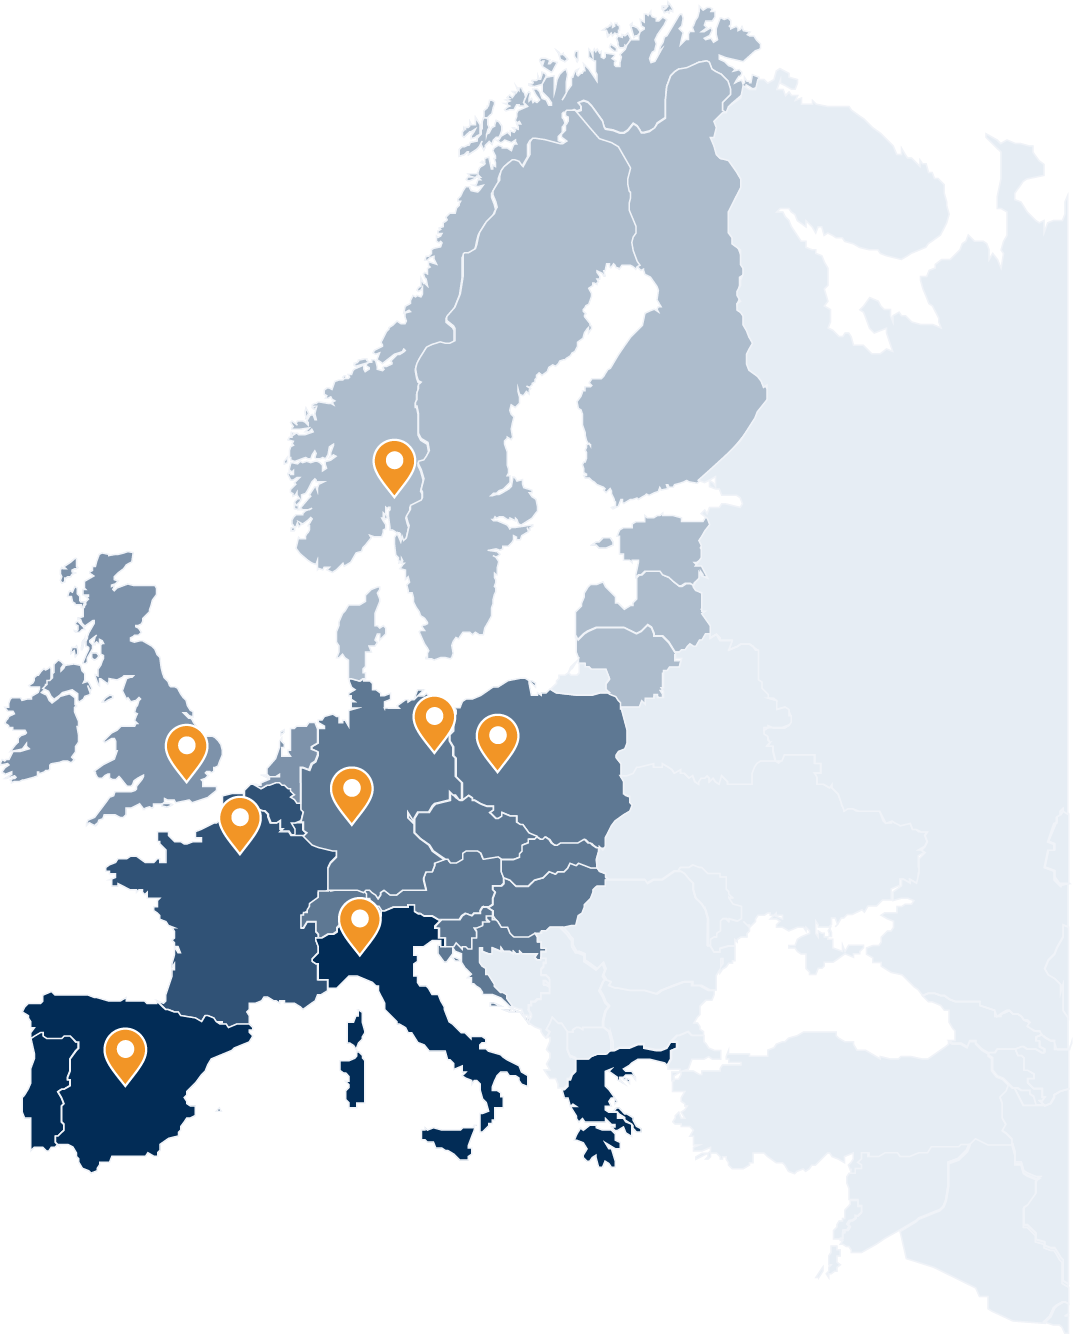 Presence in Europe Scope Group